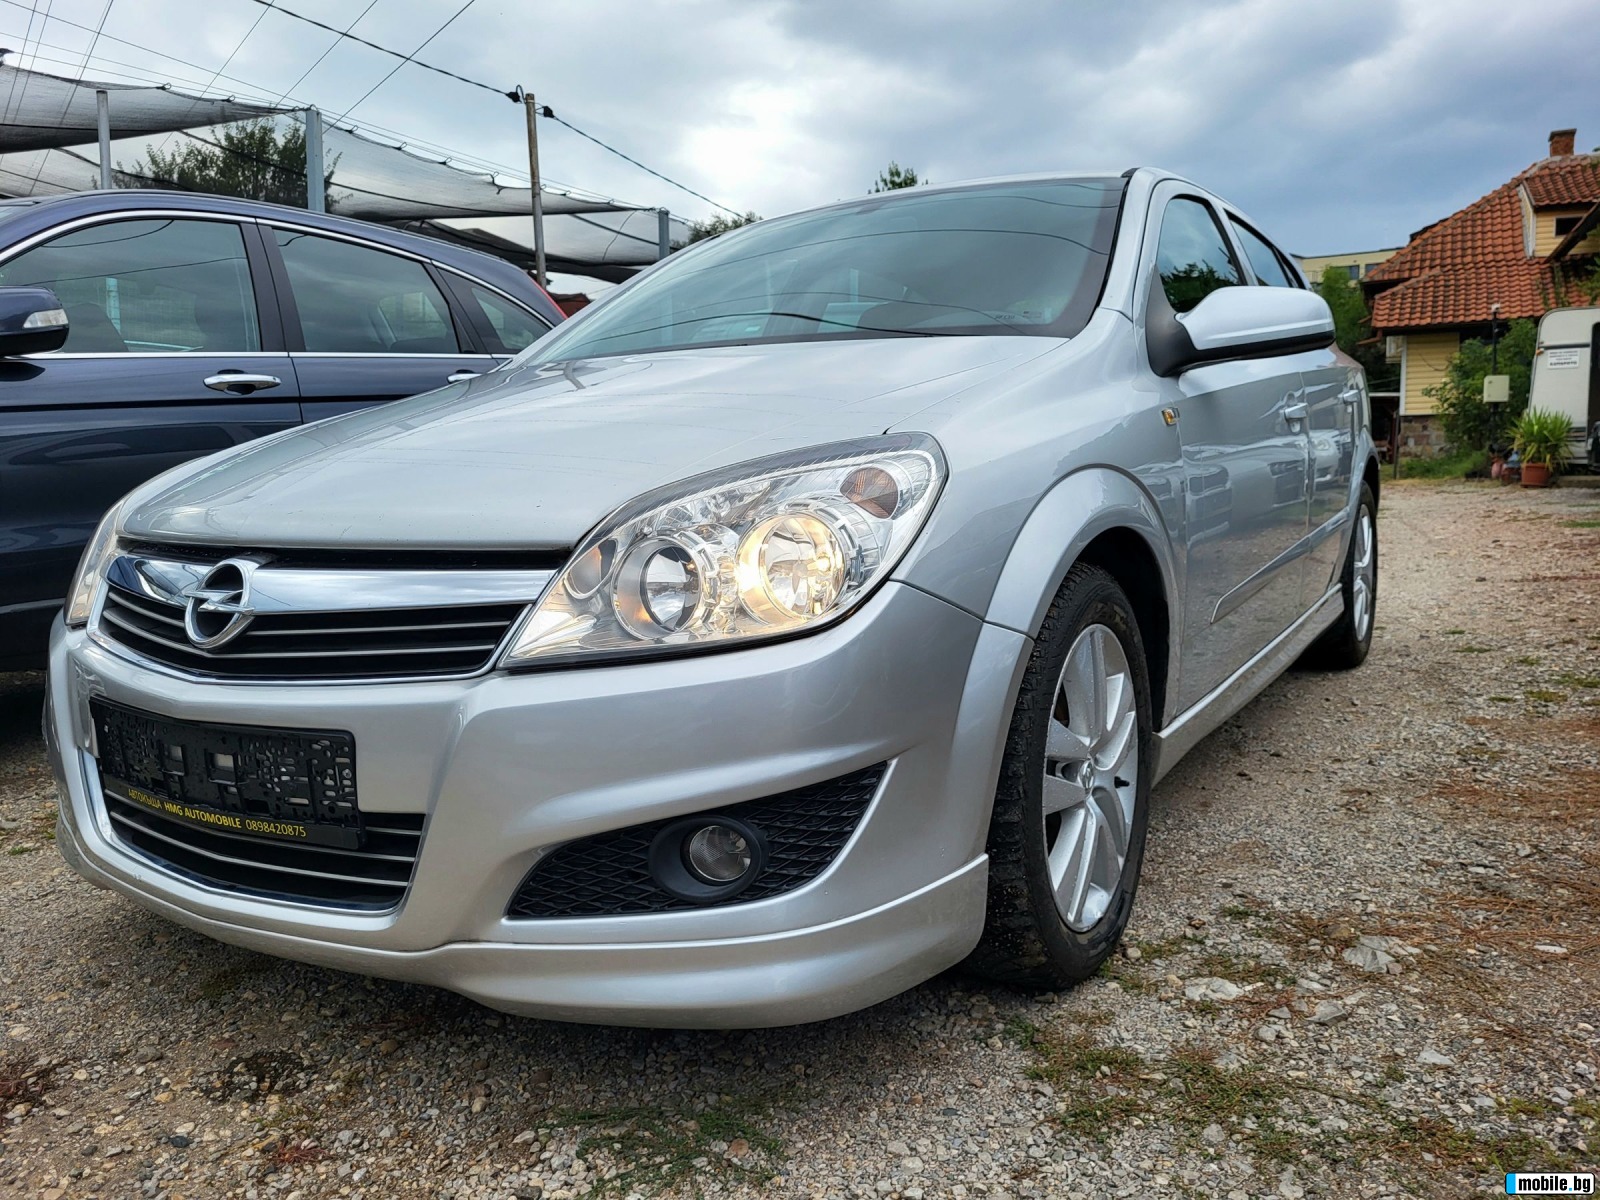 Opel Astra 1.7 CDTI - OPC PACKET  | Mobile.bg   7